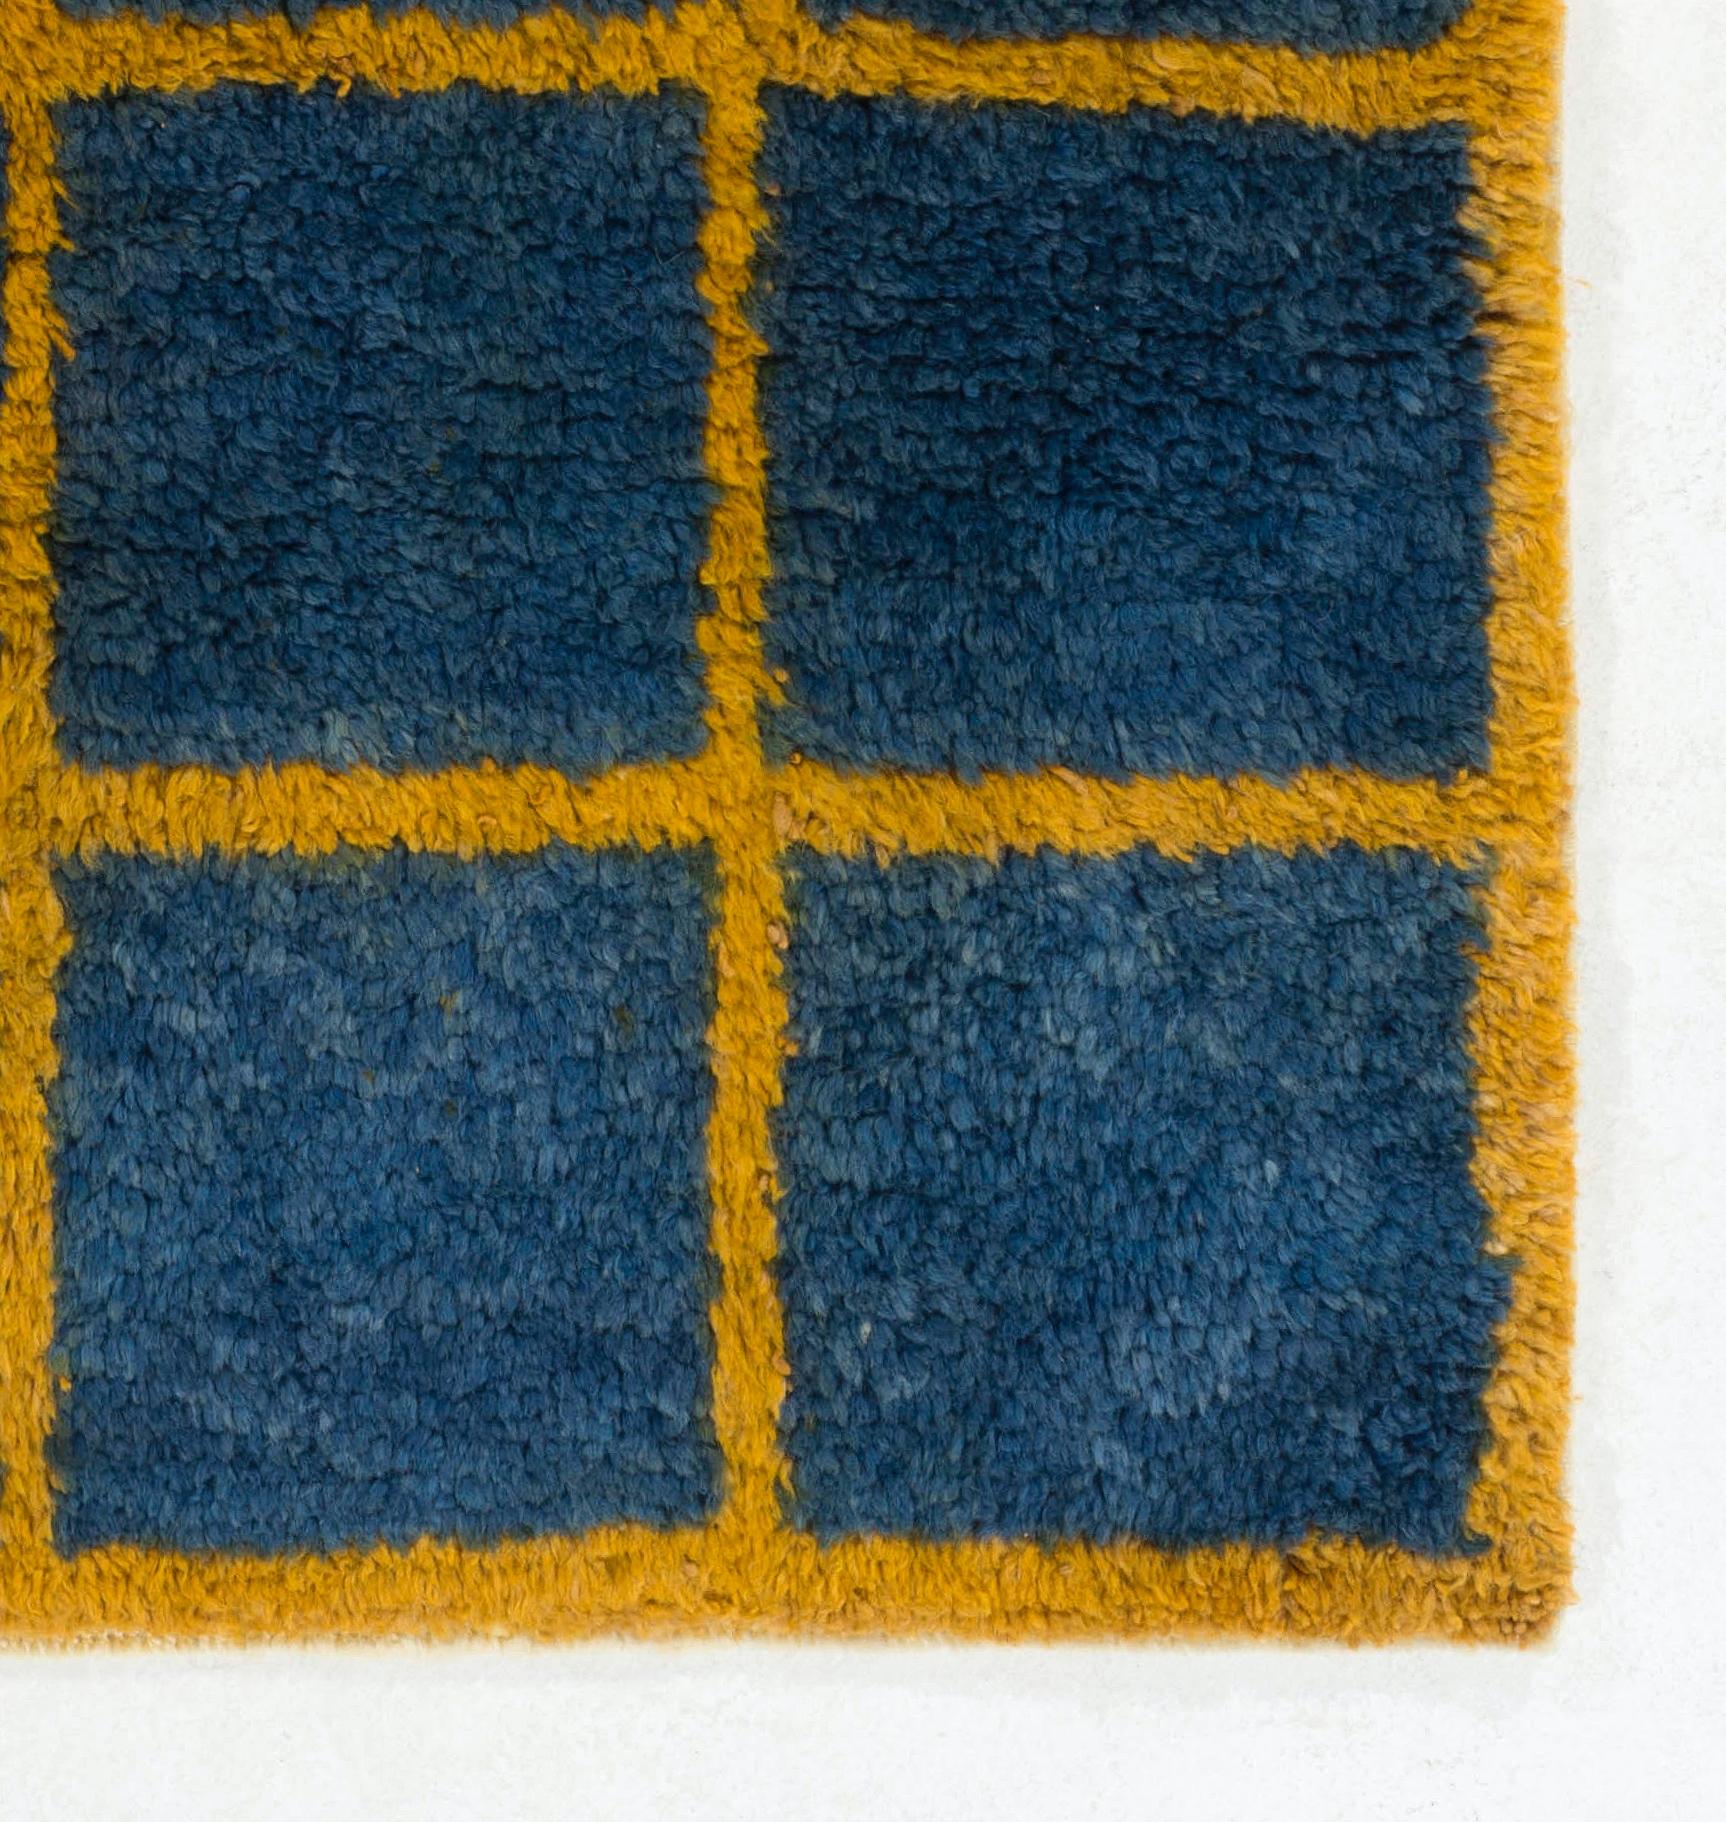 20th Century 4x6.6 Ft Vintage Checkered 'Tulu' Rug in Blue & Yellow, Custom Options Available